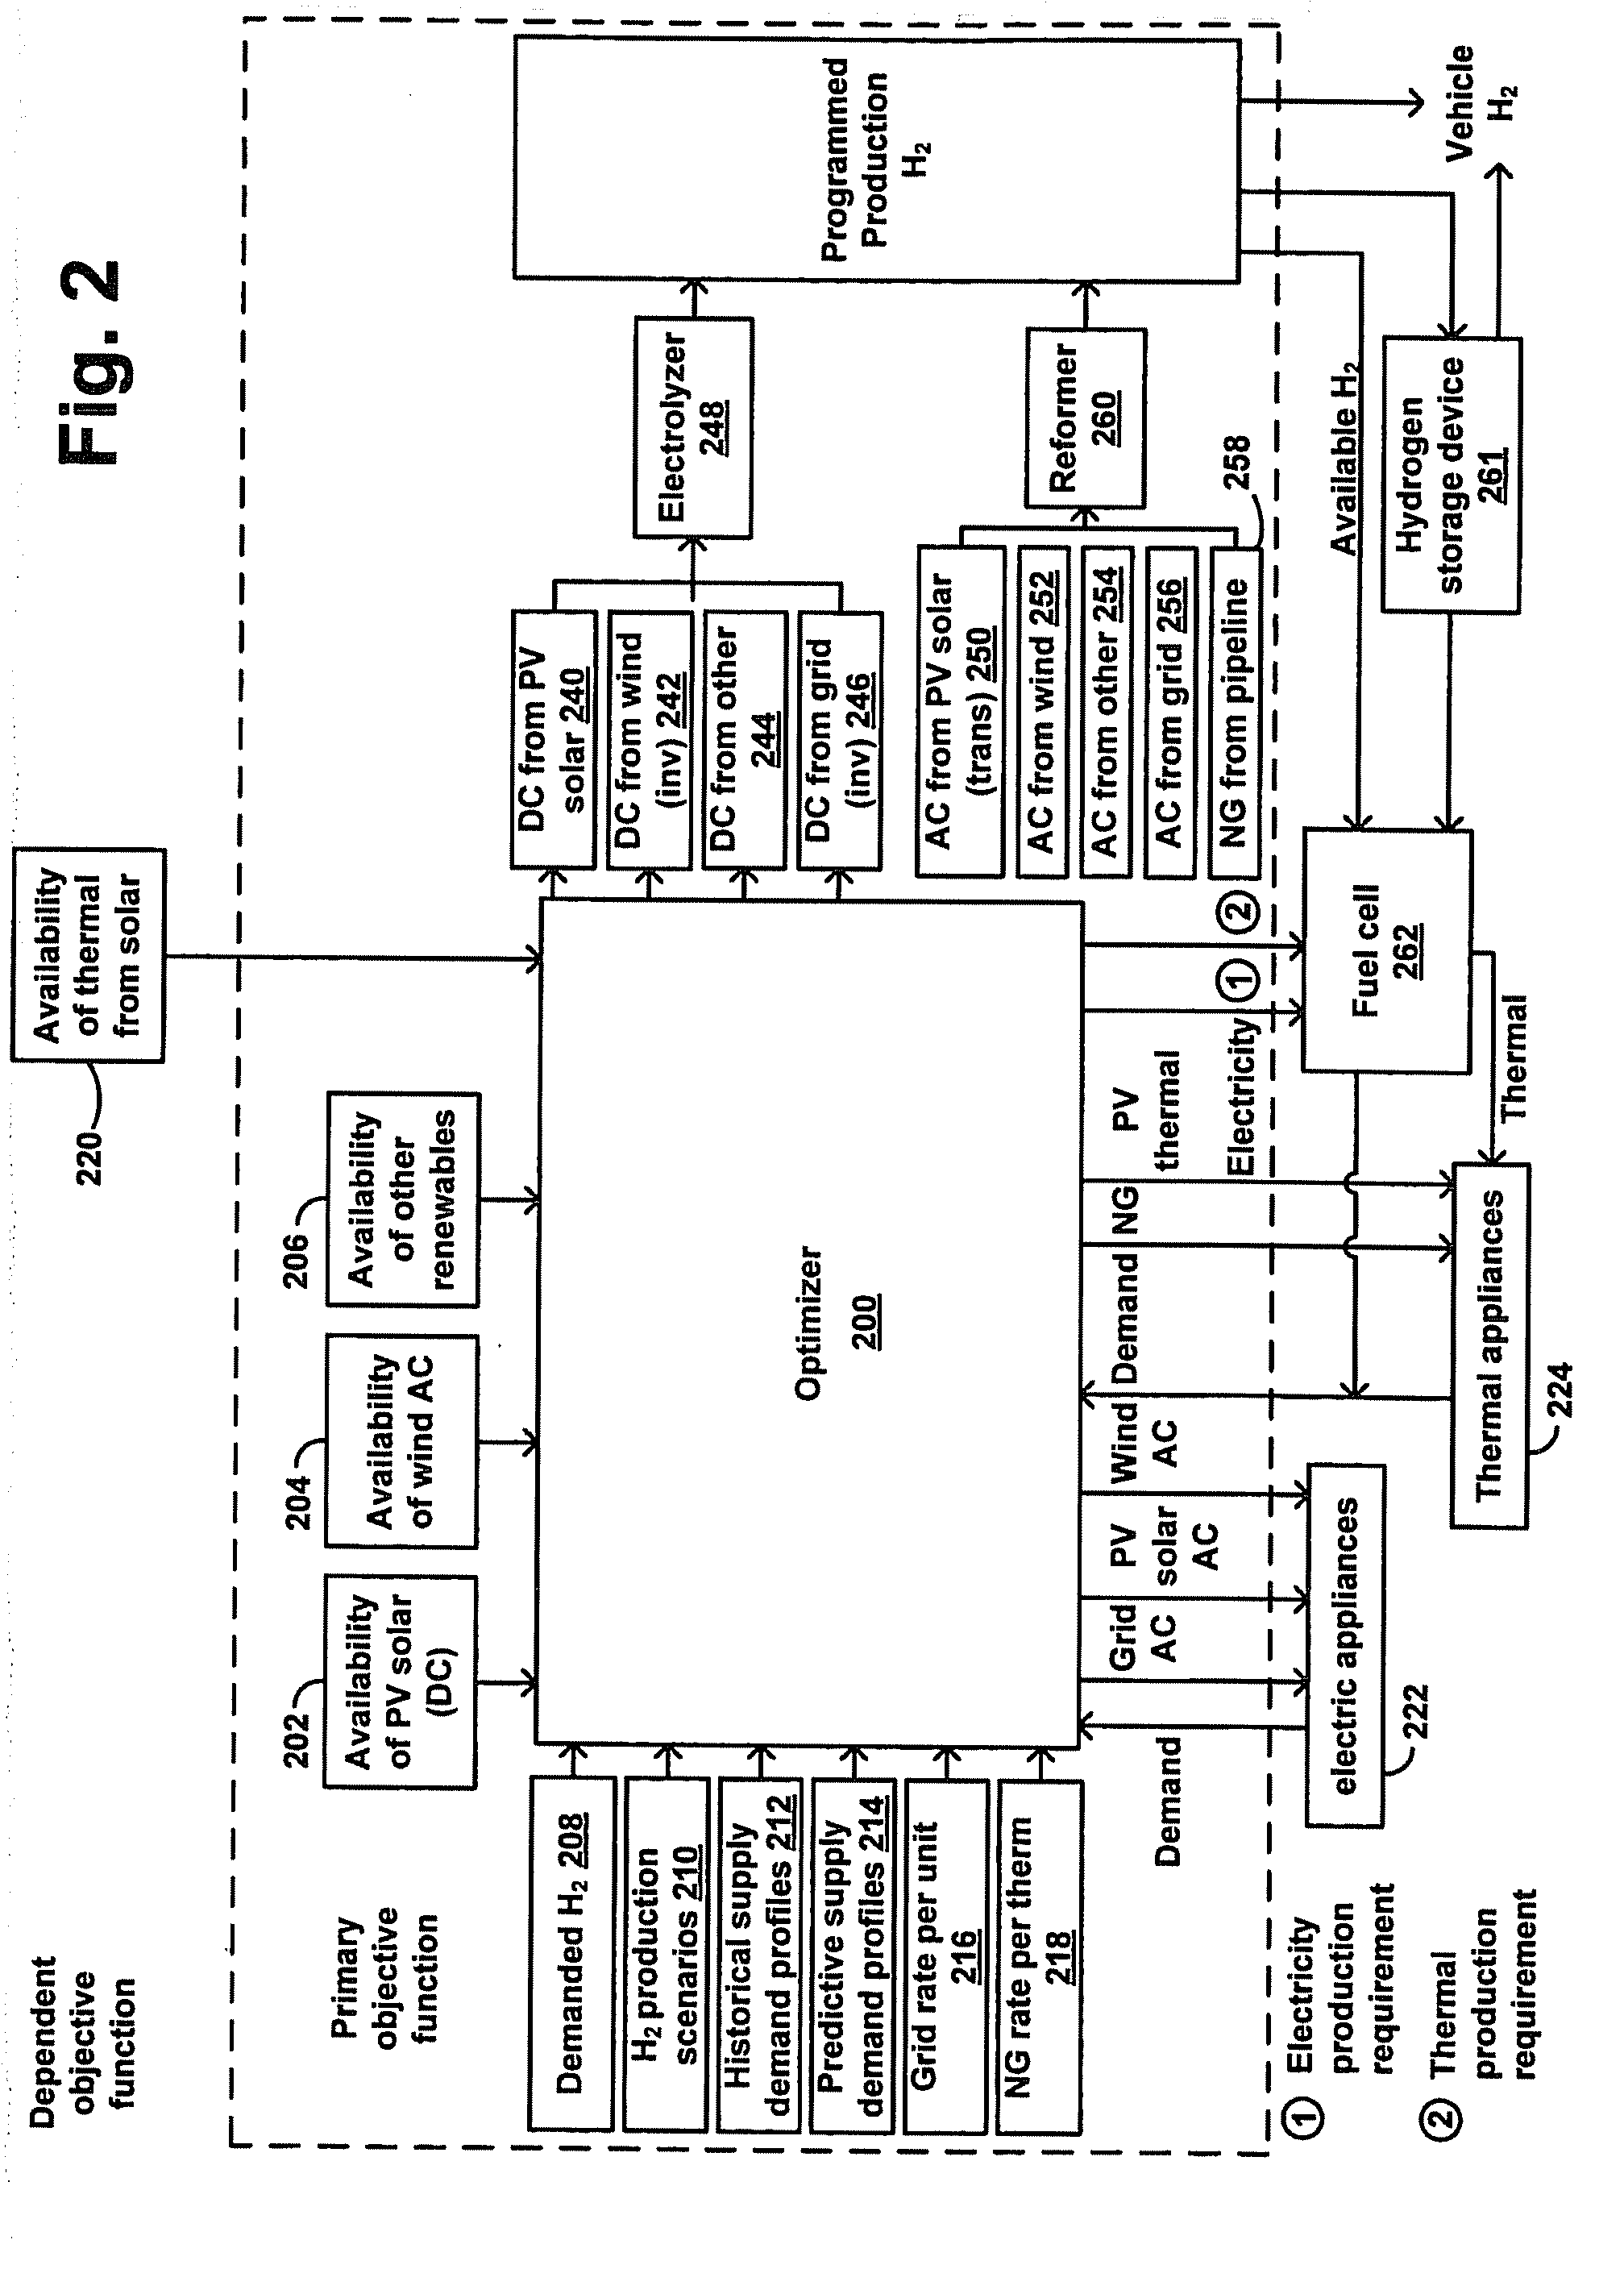 Method and Apparatus for Optimization of Distributed Generation